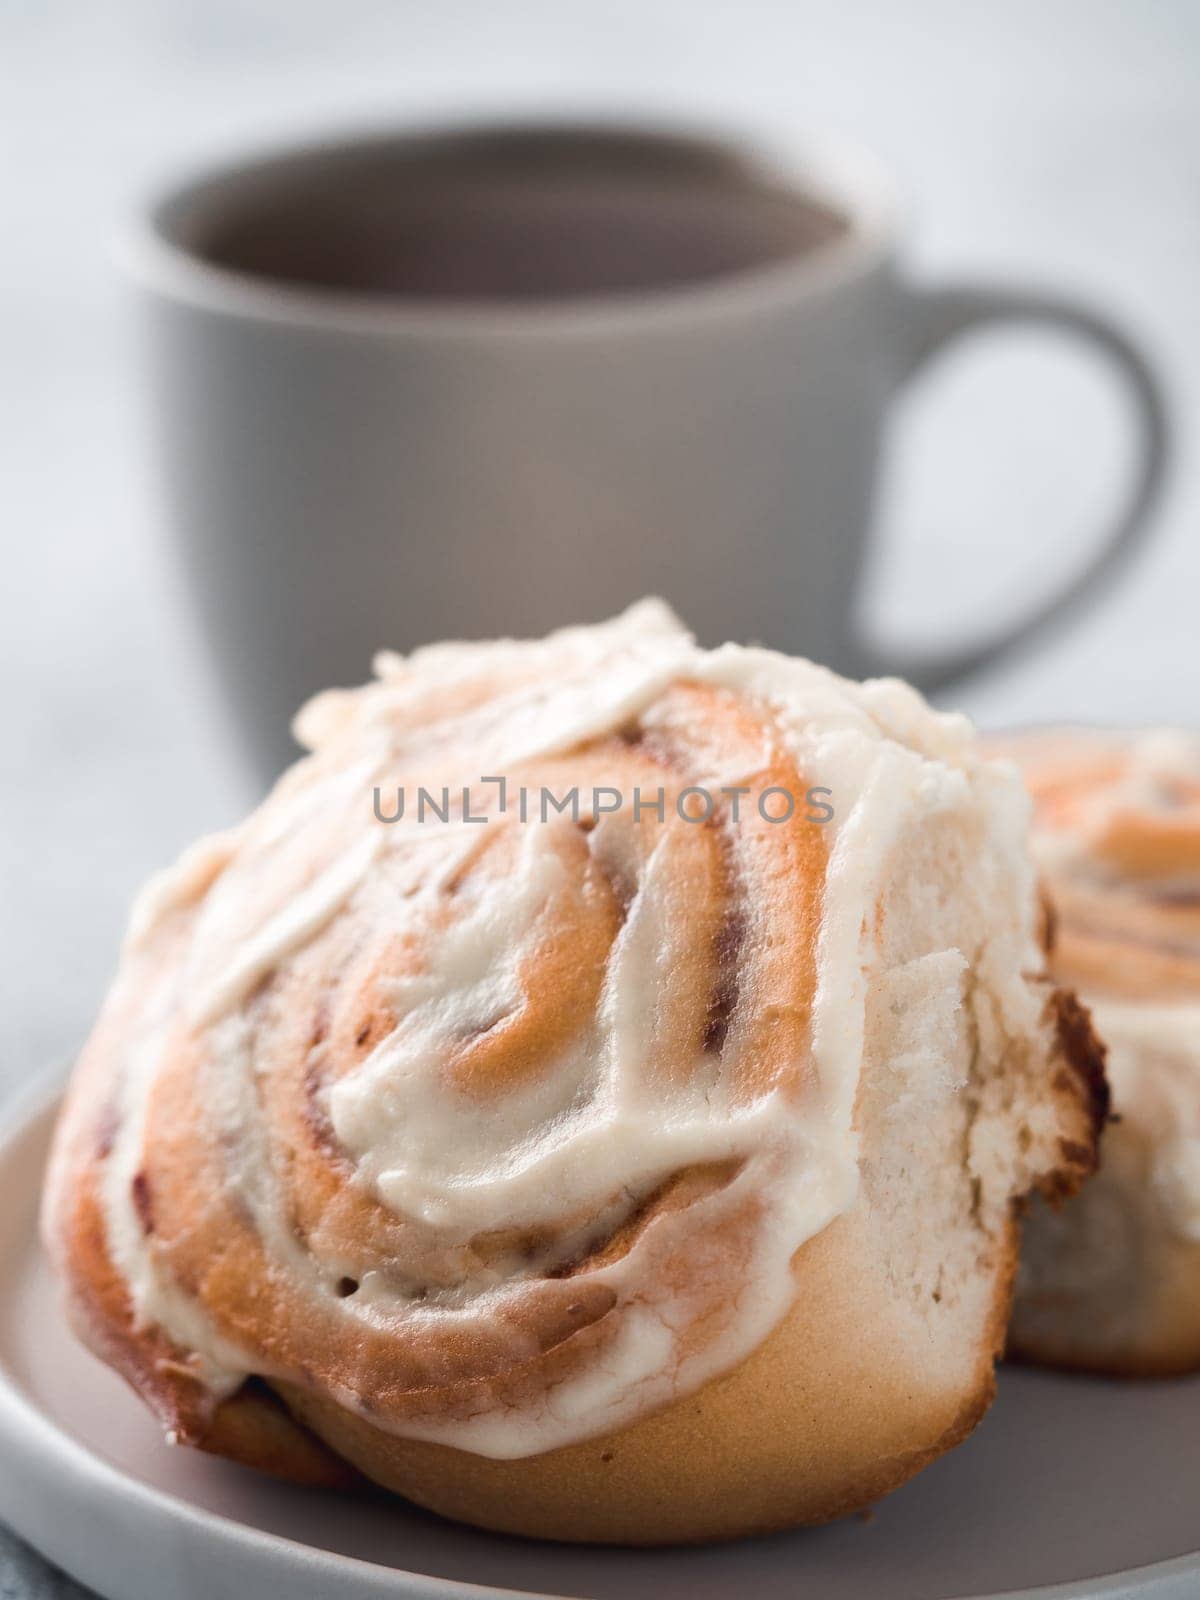 Vegan swedish cinnamon buns Kanelbullar with pumpkin spice,topping vegan cream cheese in plate with tea cup on table. Idea and recipe pastries - perfect cinnamon rolls.Copy space.Shallow DOF. Vertical